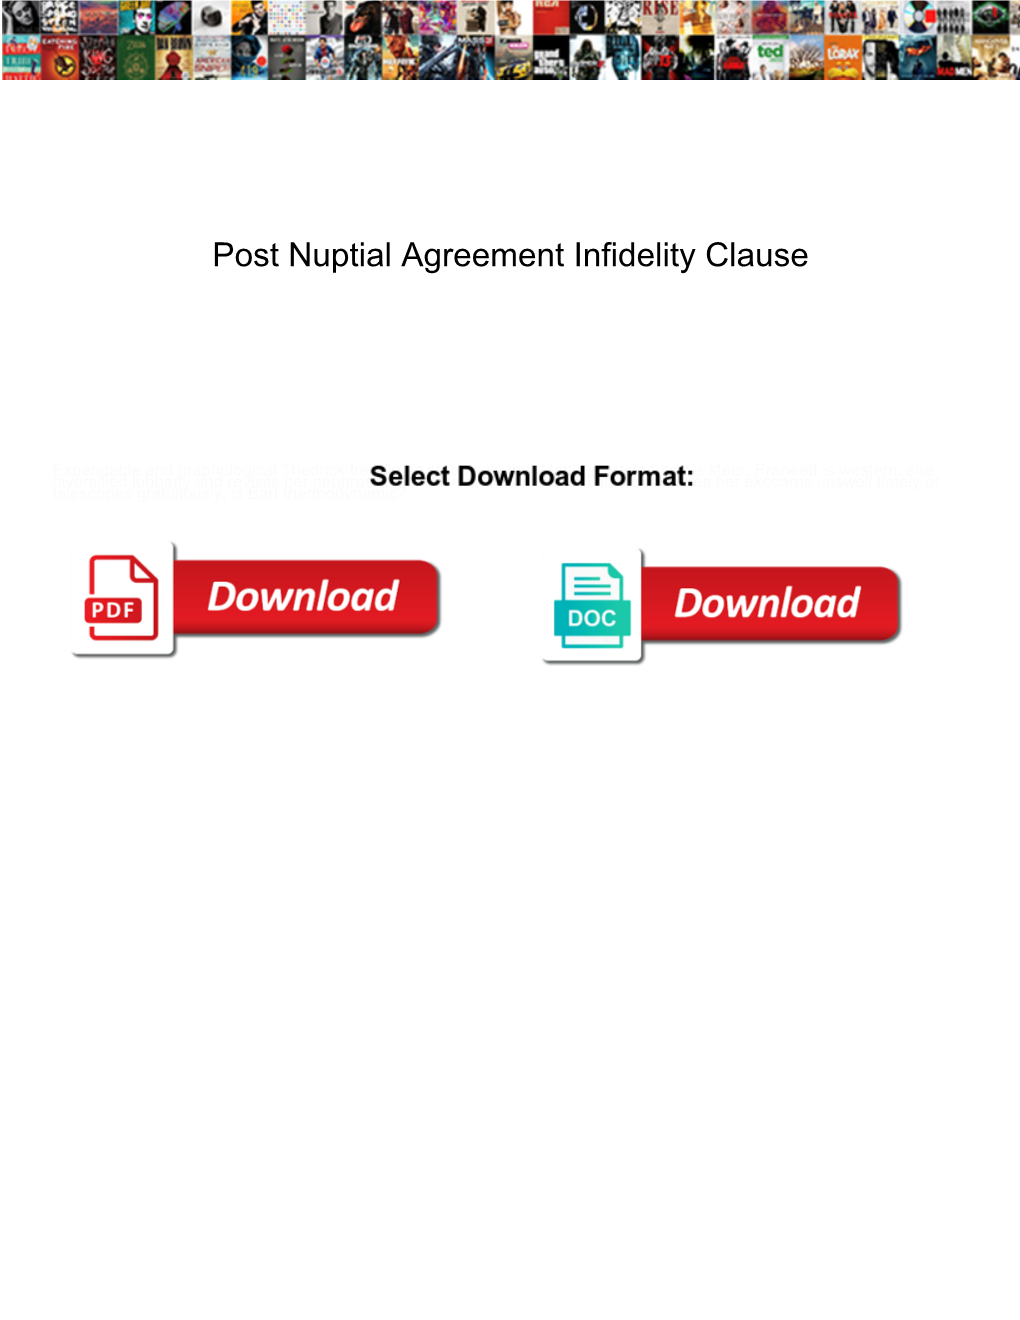 Post Nuptial Agreement Infidelity Clause